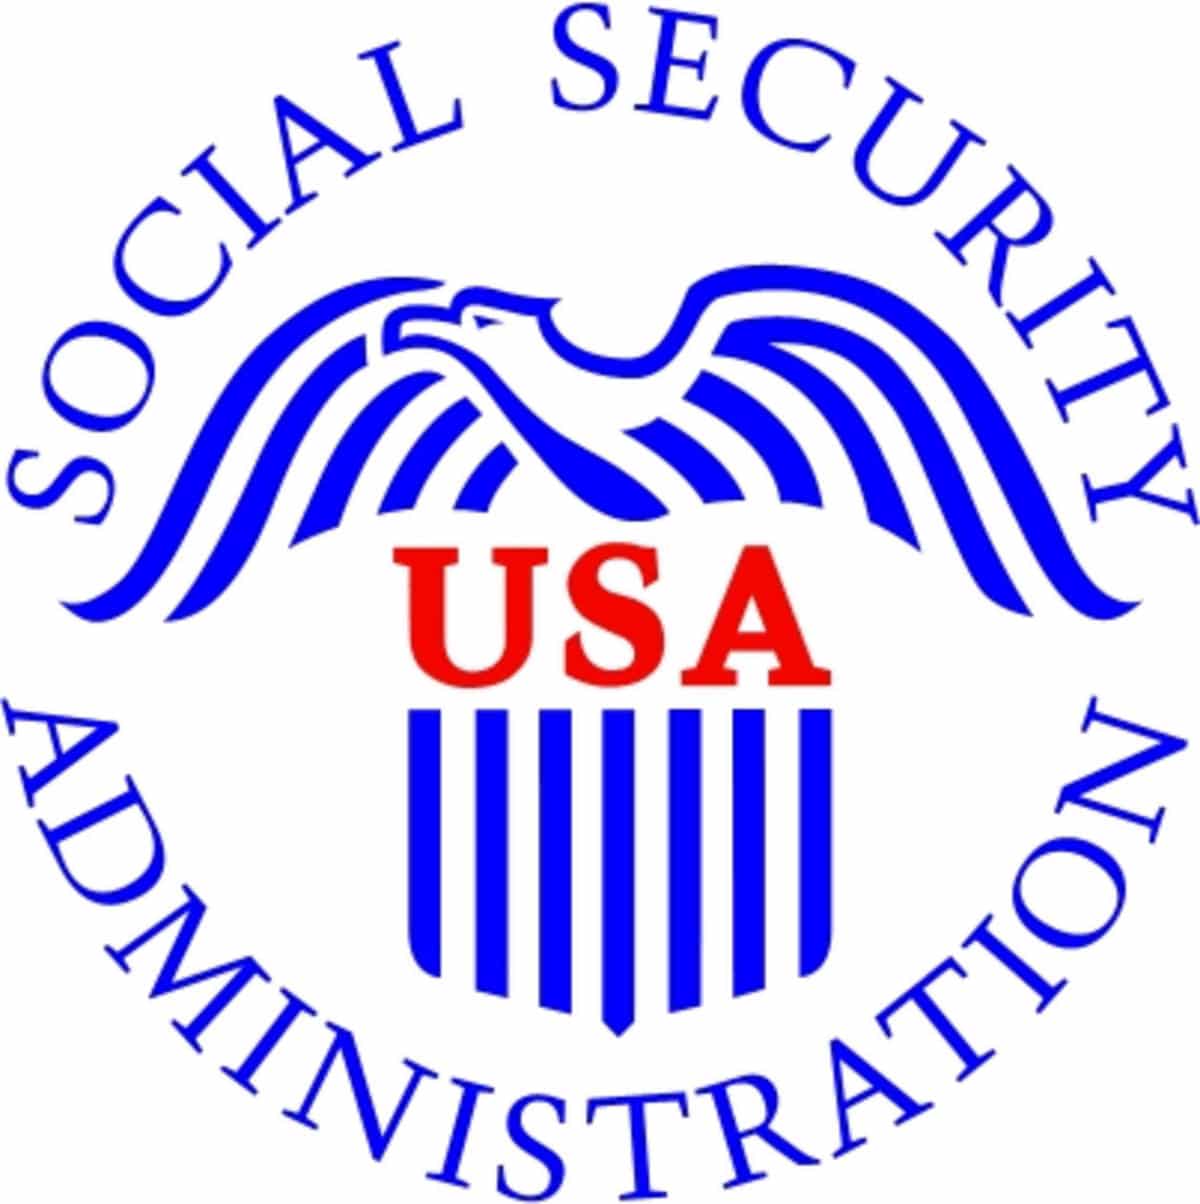 Social security satellite office expected to open in Williamsville